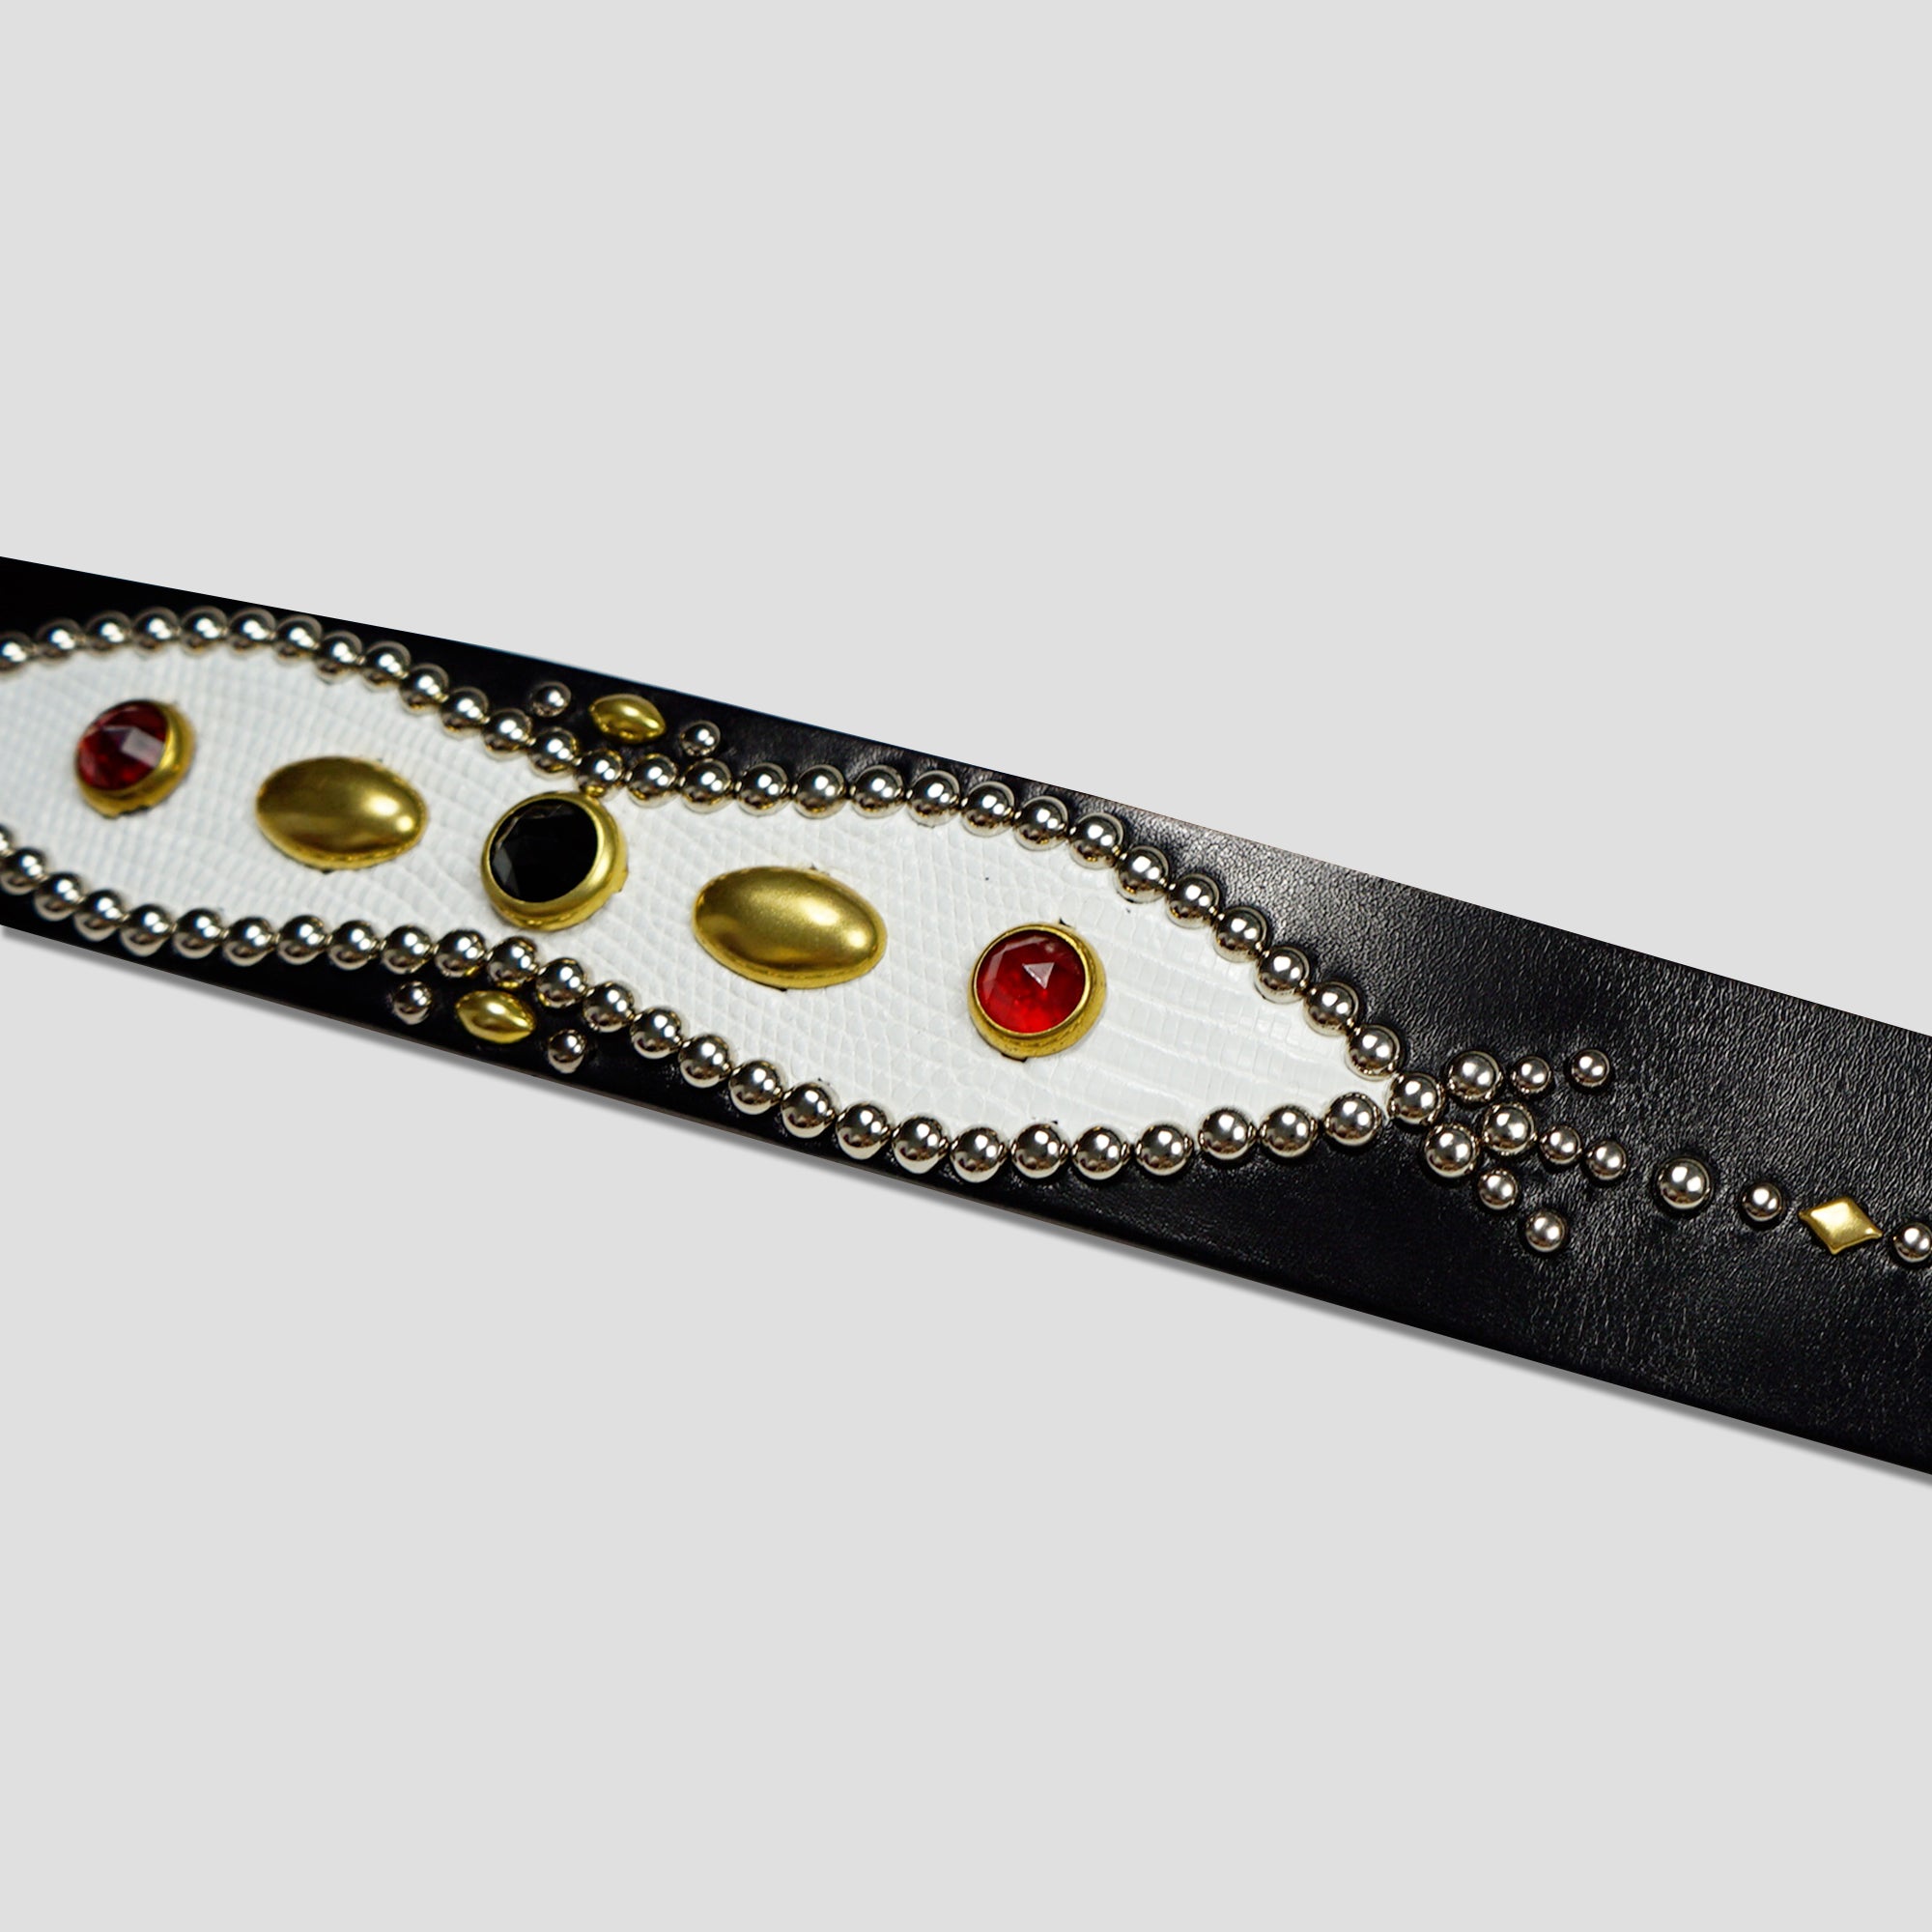 STUDDED LEATHER INLAY BELT WITH REFLECTOR - WHITE LIZARD